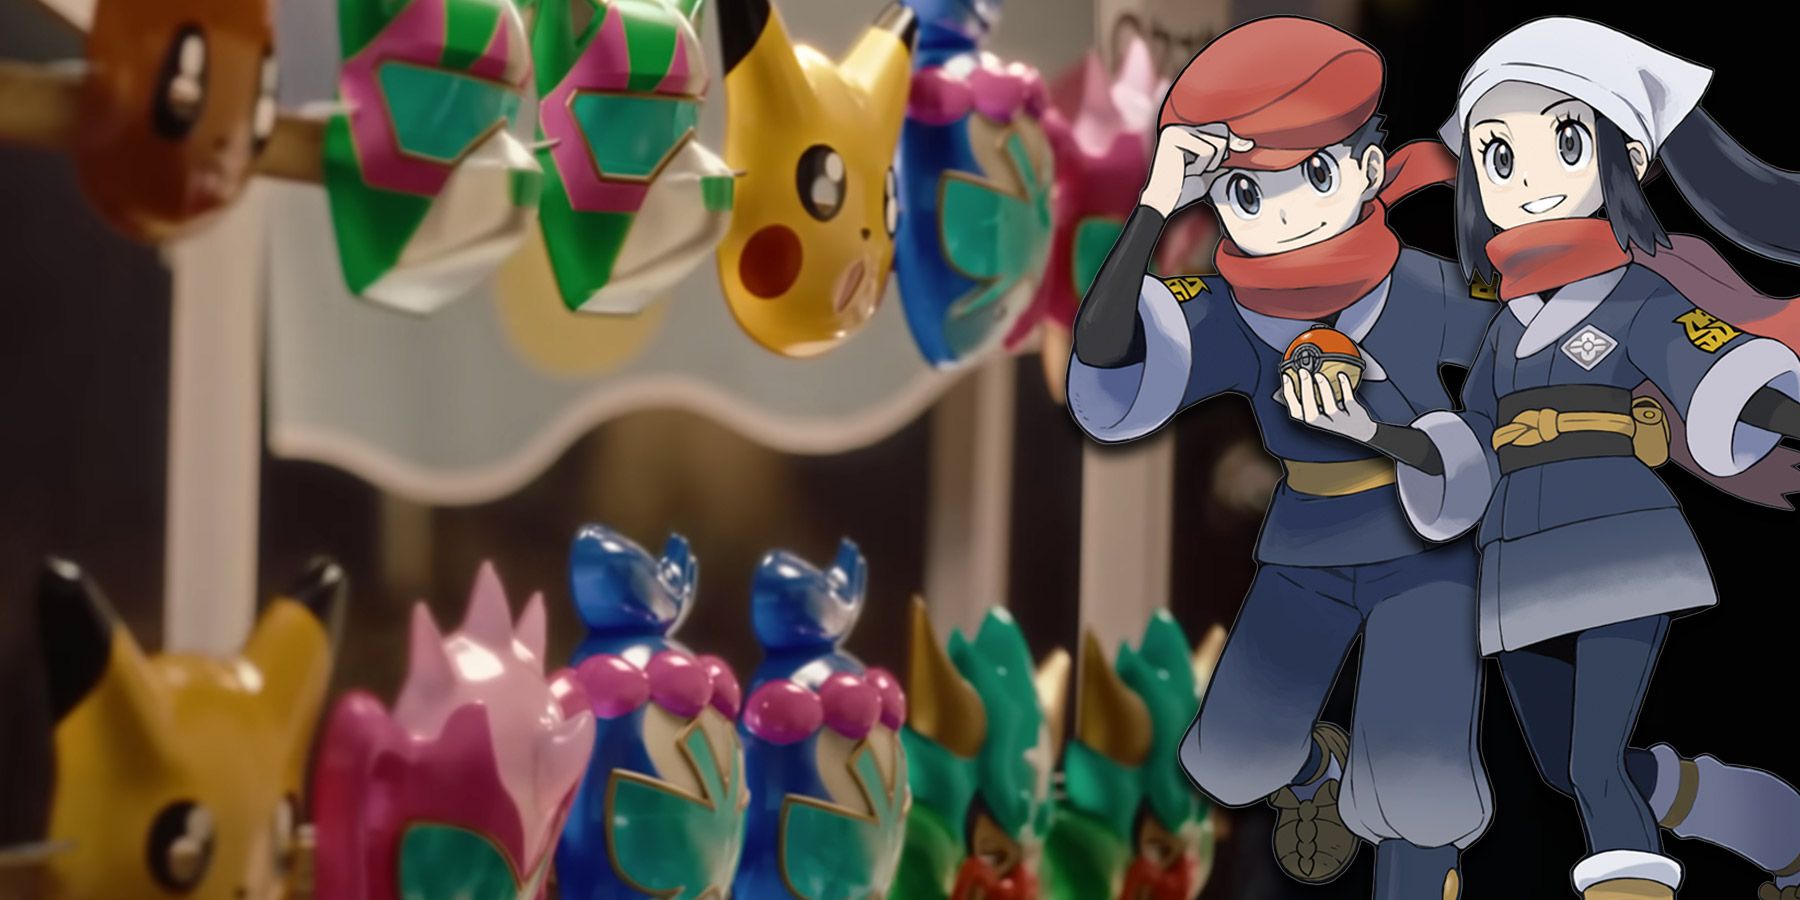 Pokemon Scarlet and Violet: The Teal Mask DLC All New Pokemon